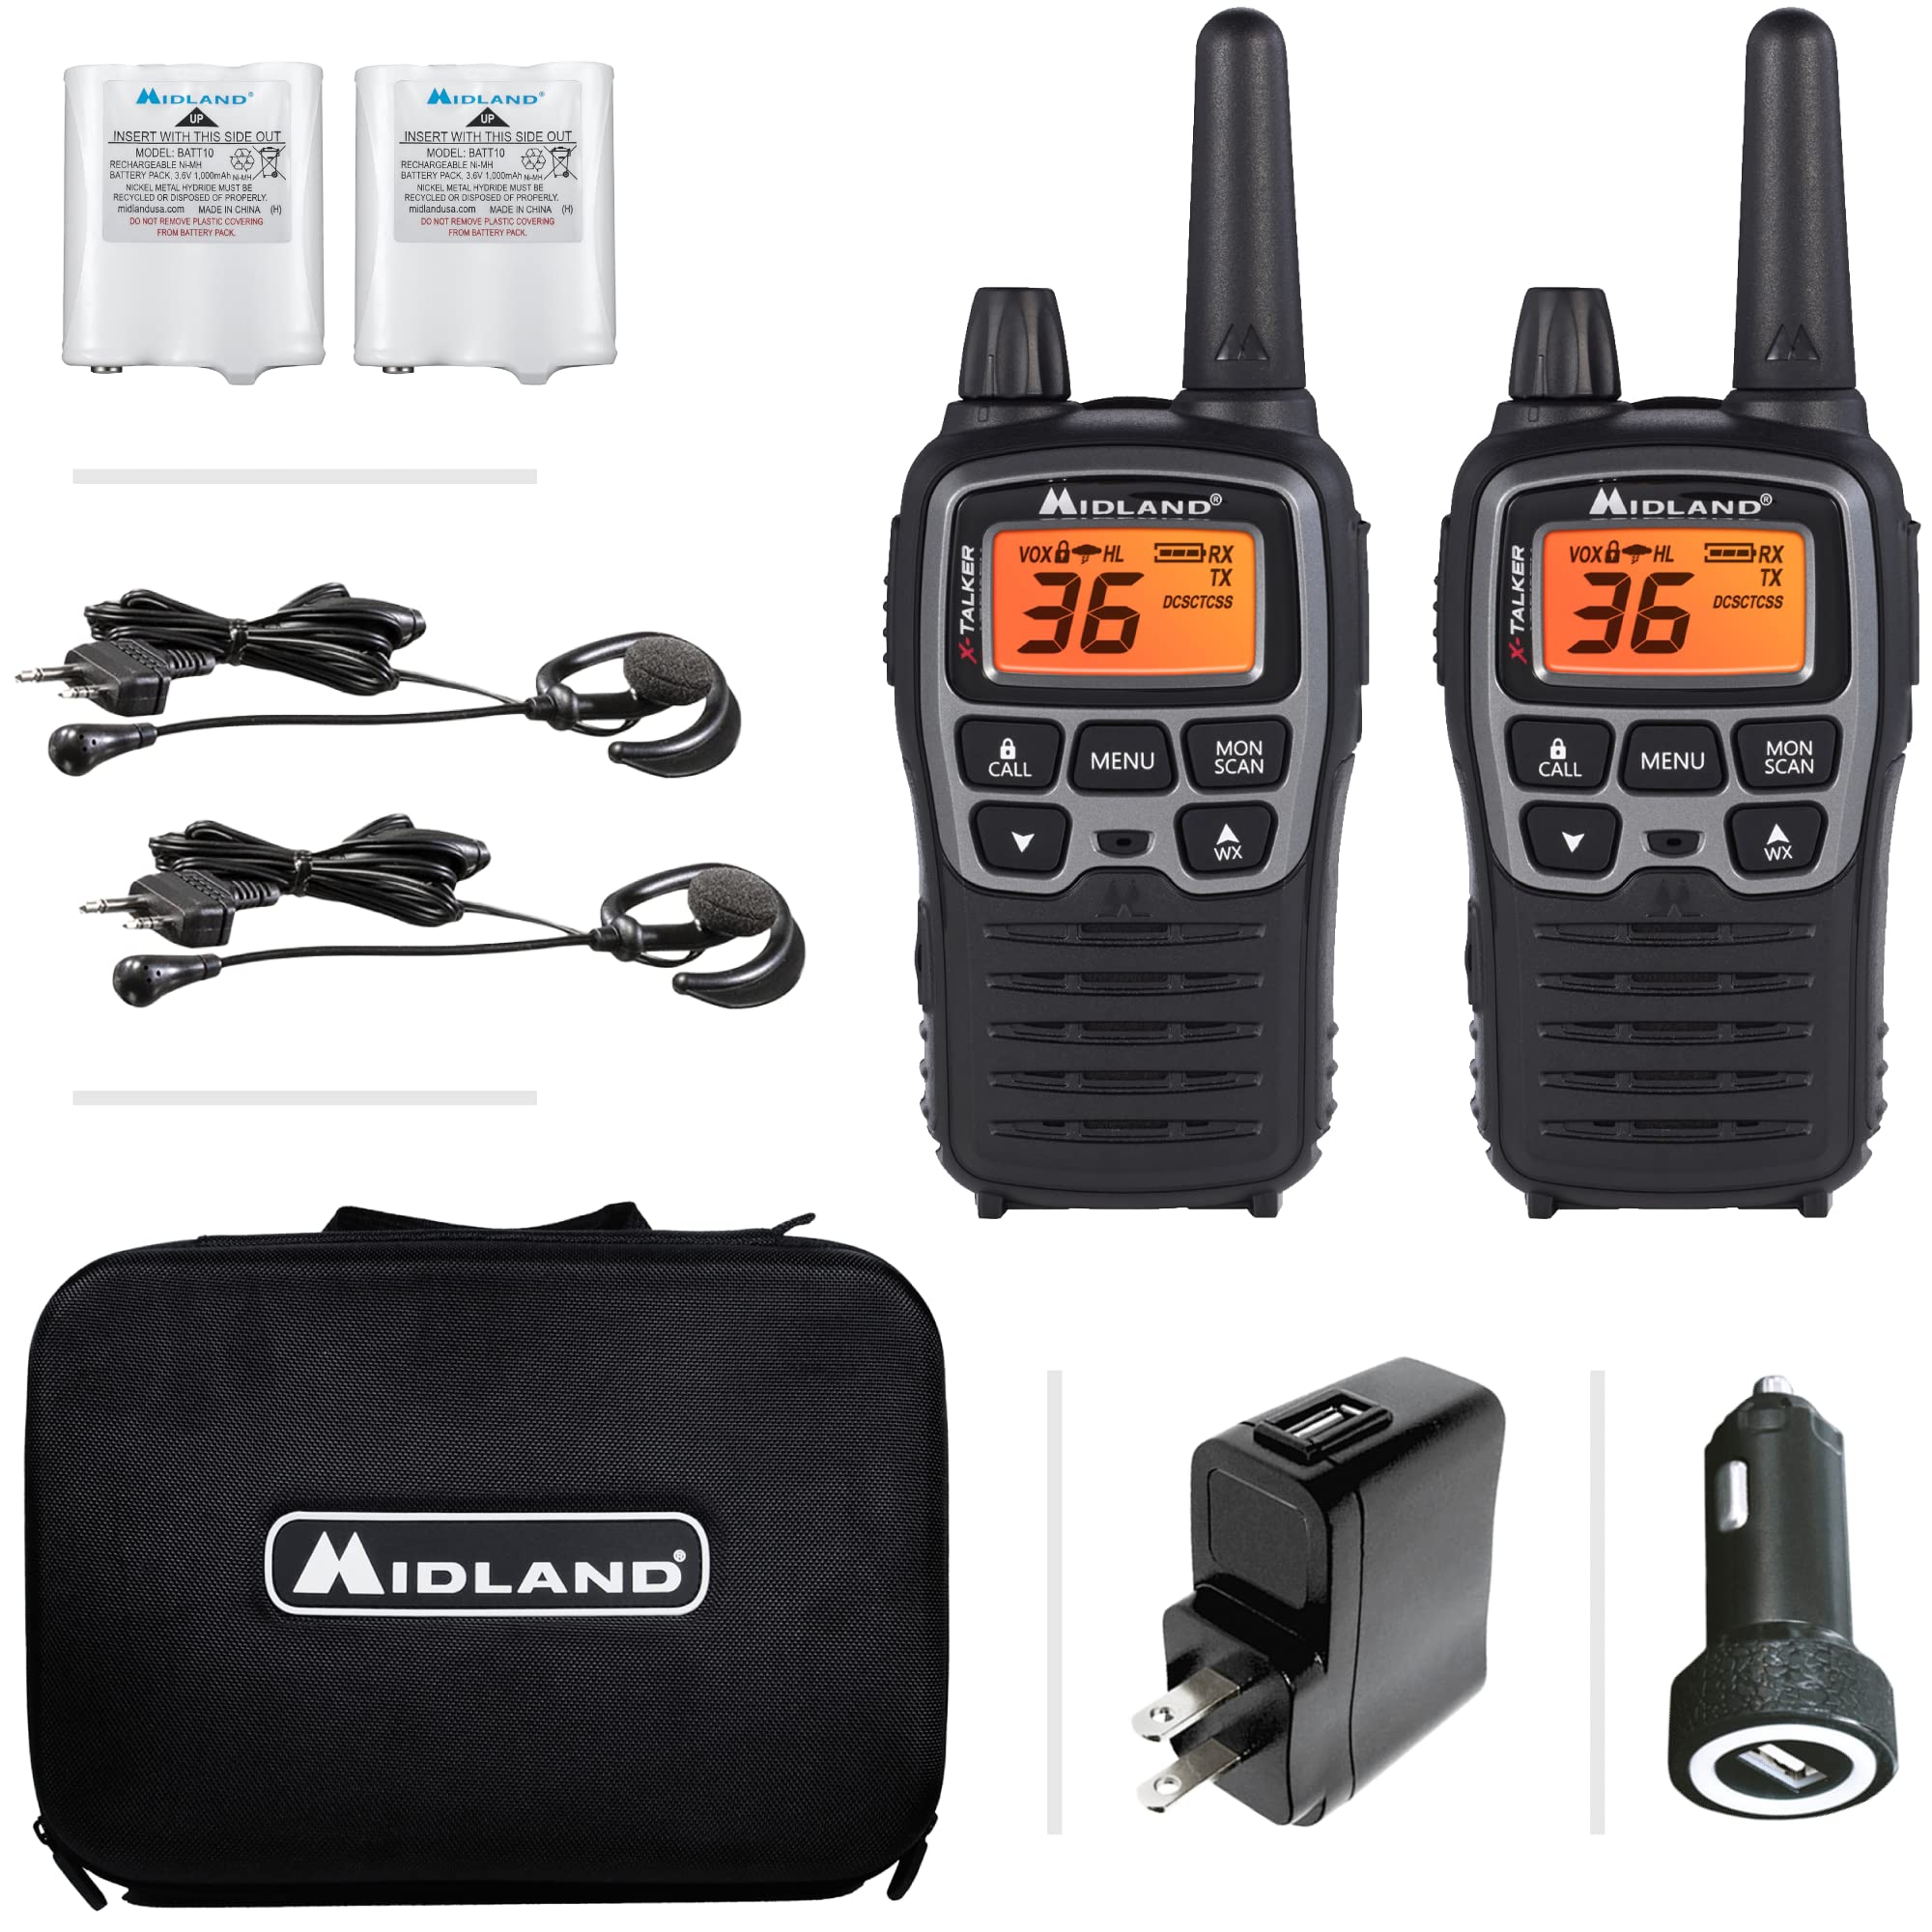 Midland T77VP5 X-TALKER Long Range Walkie-Talkie FRS Two-Way Radio for Camping Overlanding NOAA Weather Scan + Alert, 121 Privacy Codes - Includes Carrying Case & Headset Black/Silver, 2 Radio Bundle